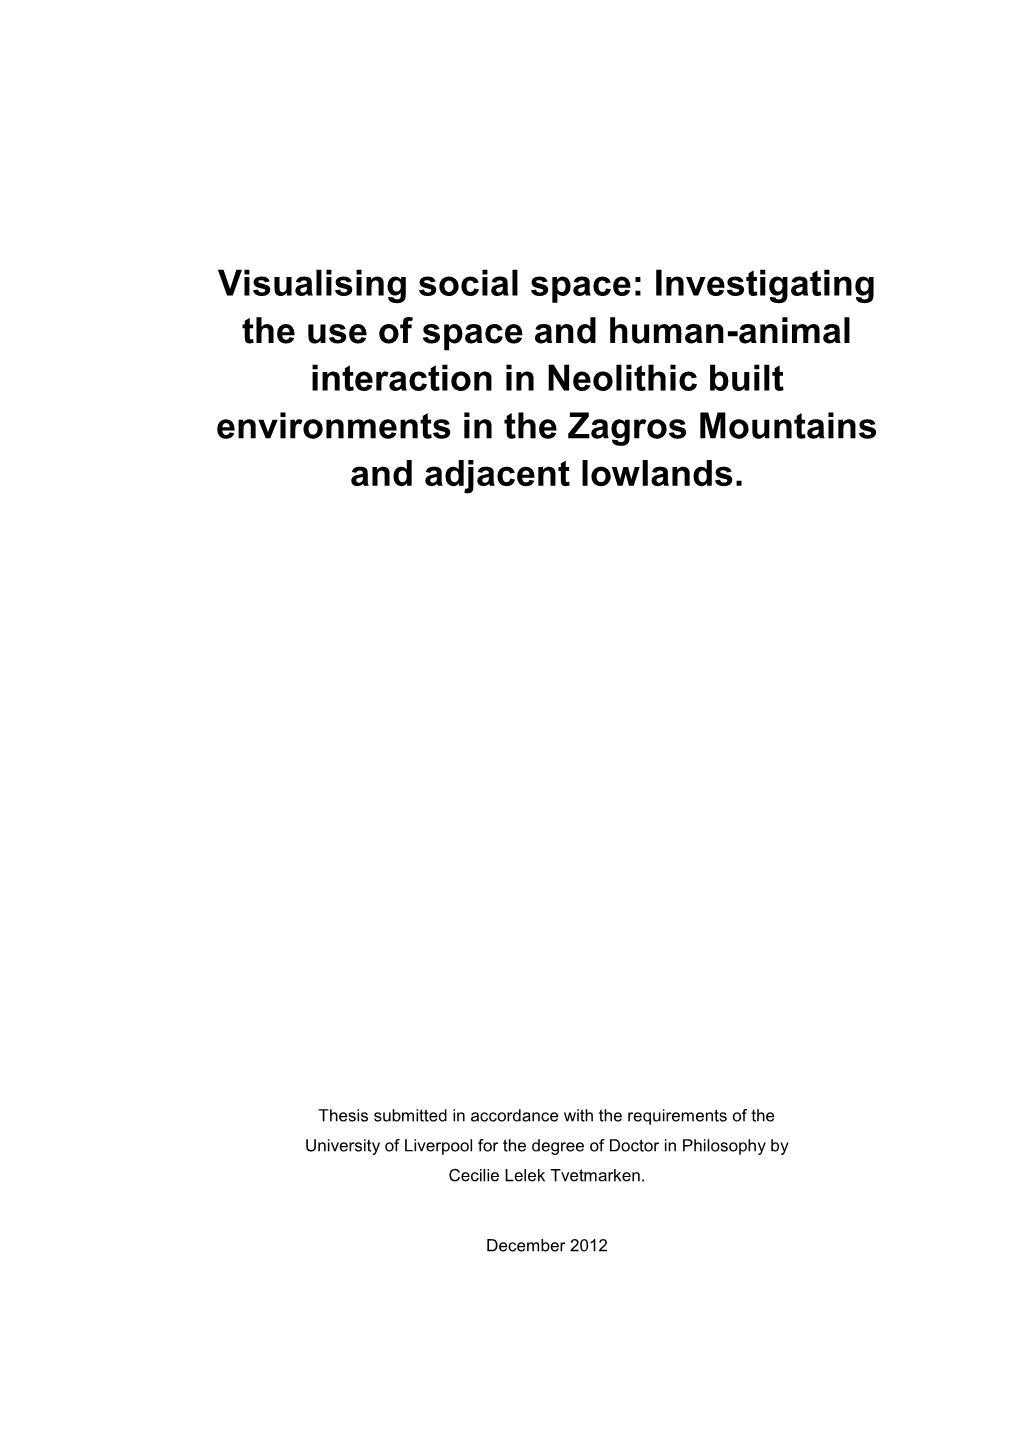 Investigating the Use of Space and Human-Animal Interaction in Neolithic Built Environments in the Zagros Mountains and Adjacent Lowlands